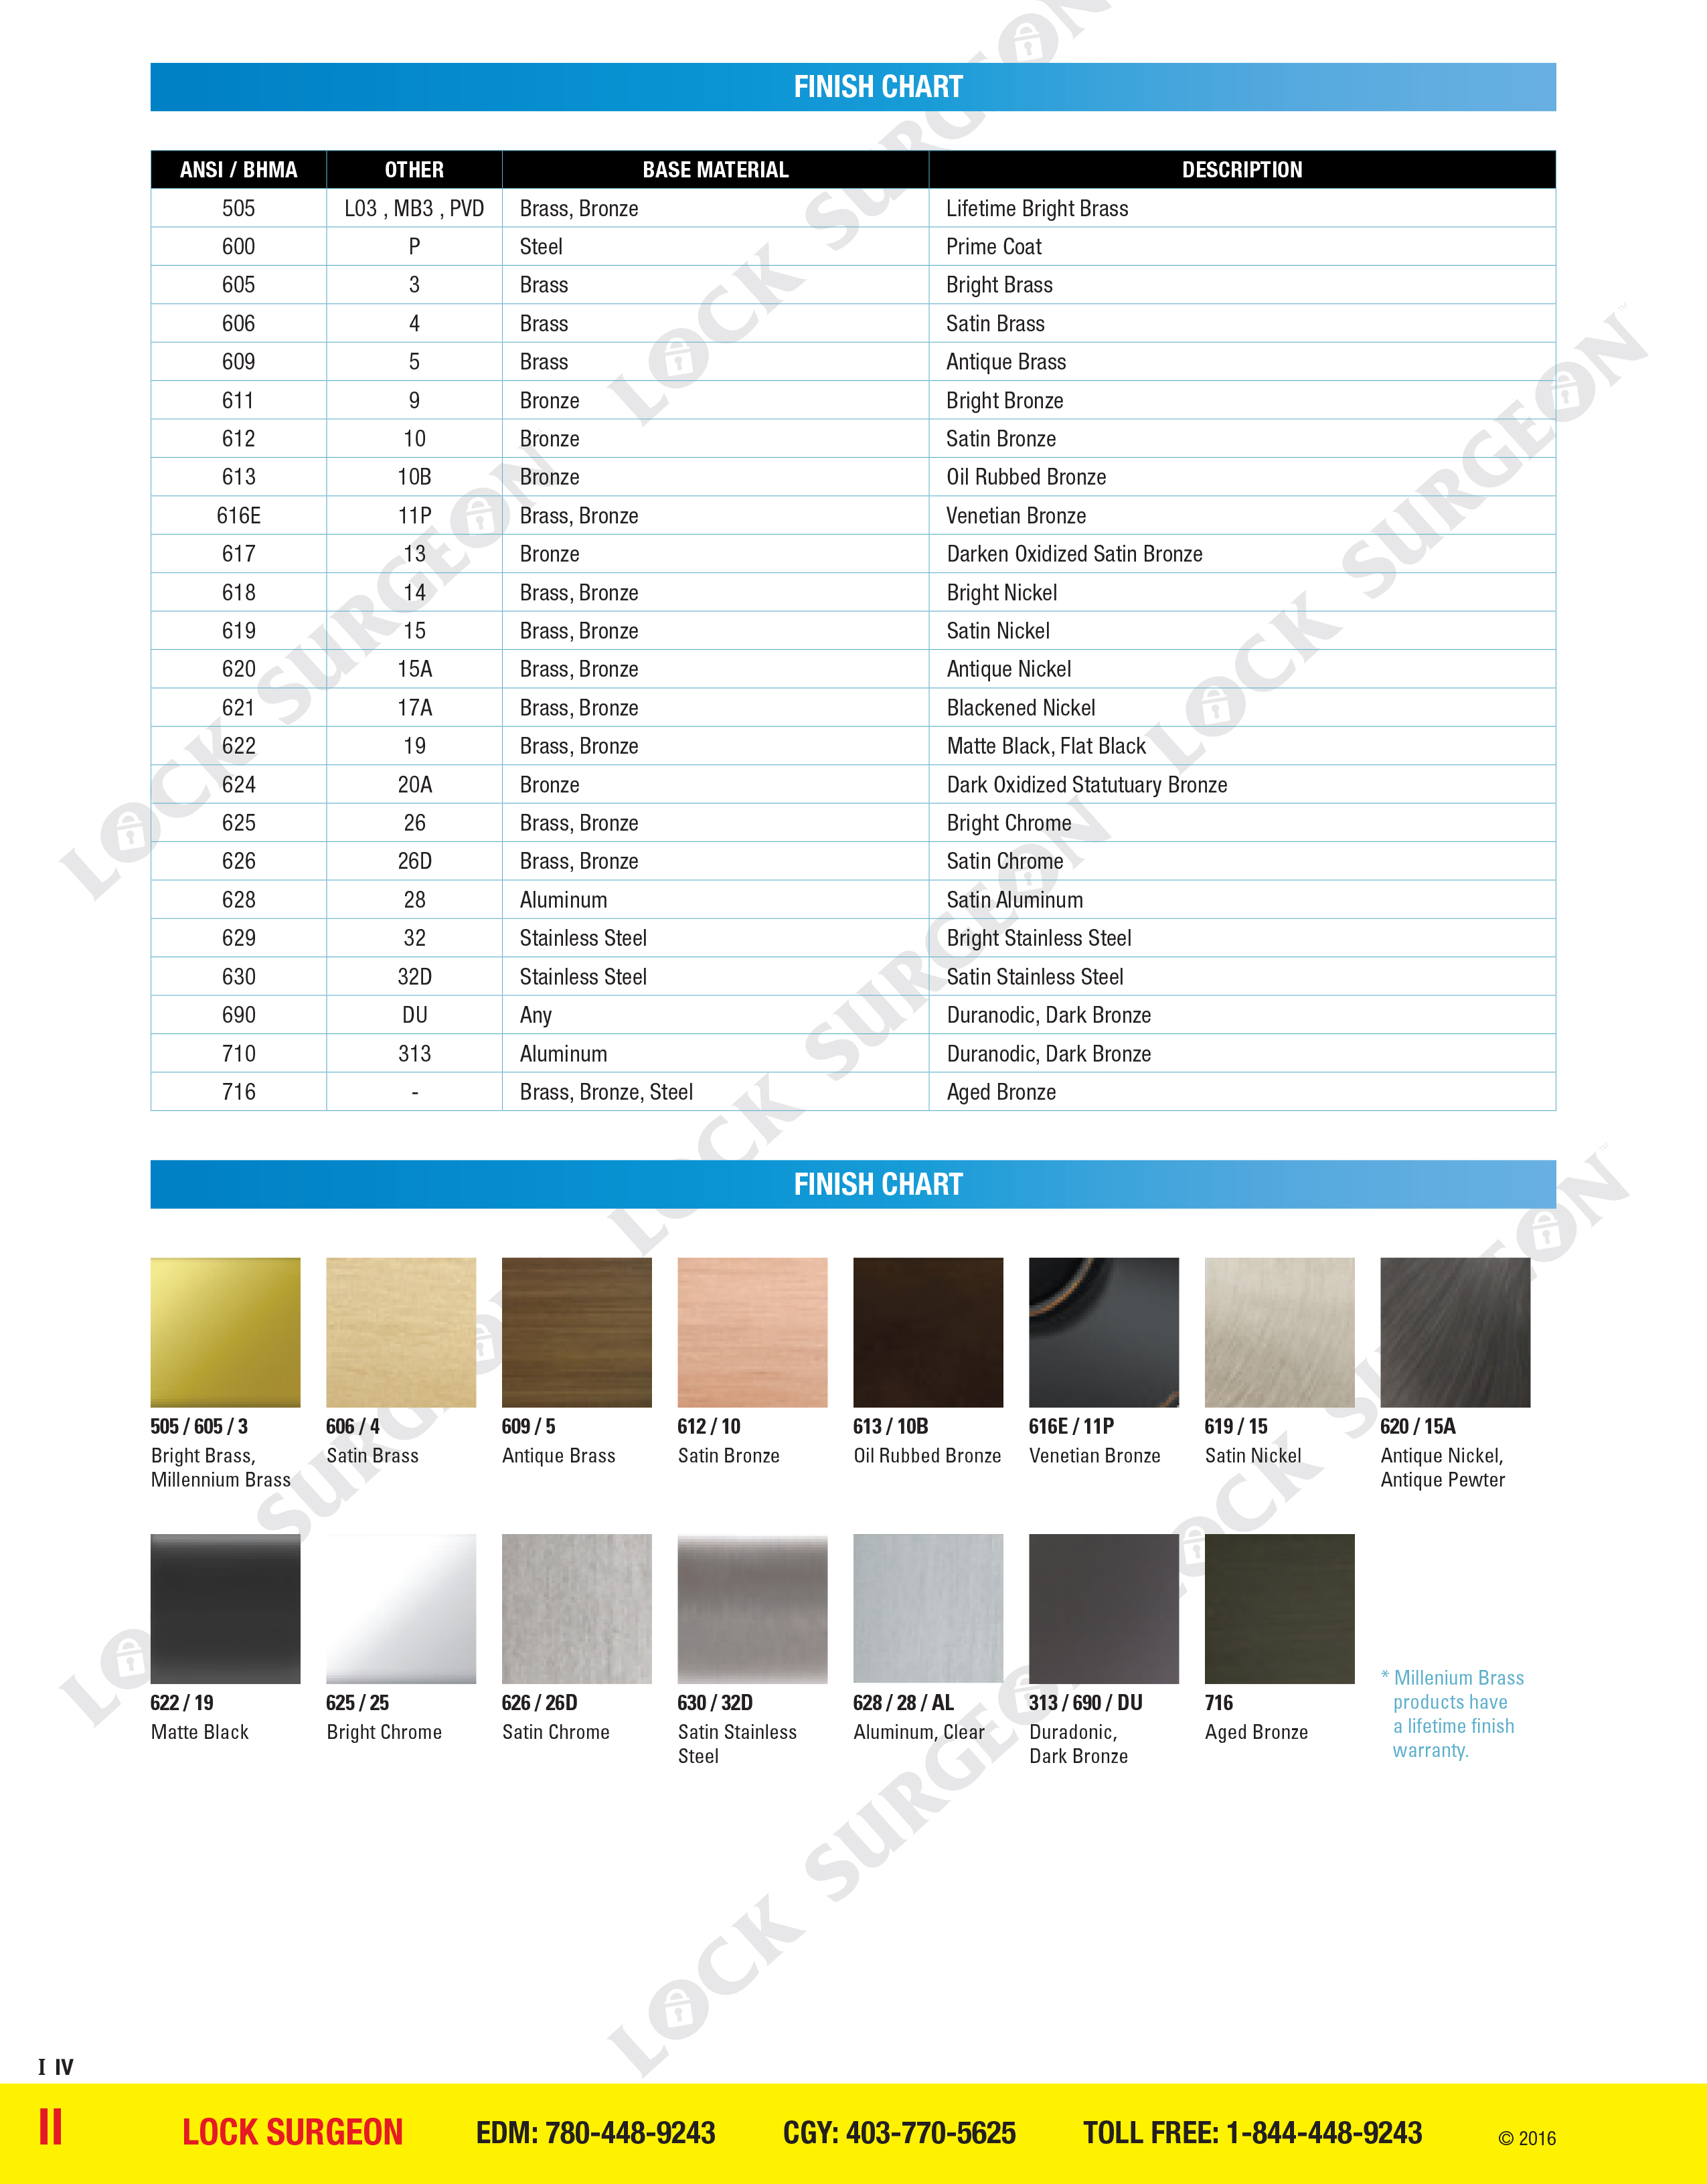 Colour finishes available in: brightbrass, satin brass, satin bronze, oil rubbed bronze, venetian bronze, satin nickle, antique nickle, matte black, bright chrome, satin chrome, satin stainless steel, aluminum clear, dark bronze, aged bronze